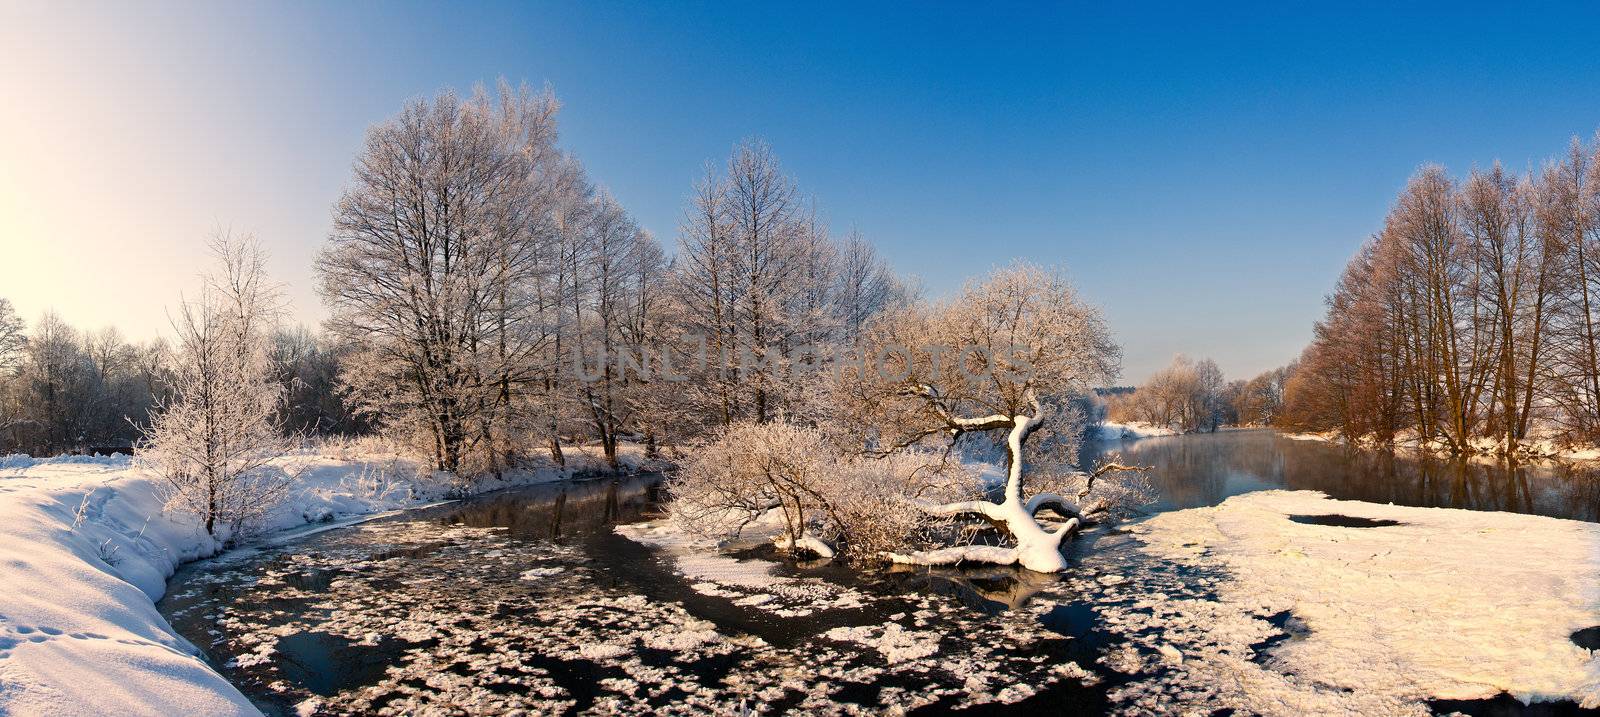 sunny day on winter river by Alekcey